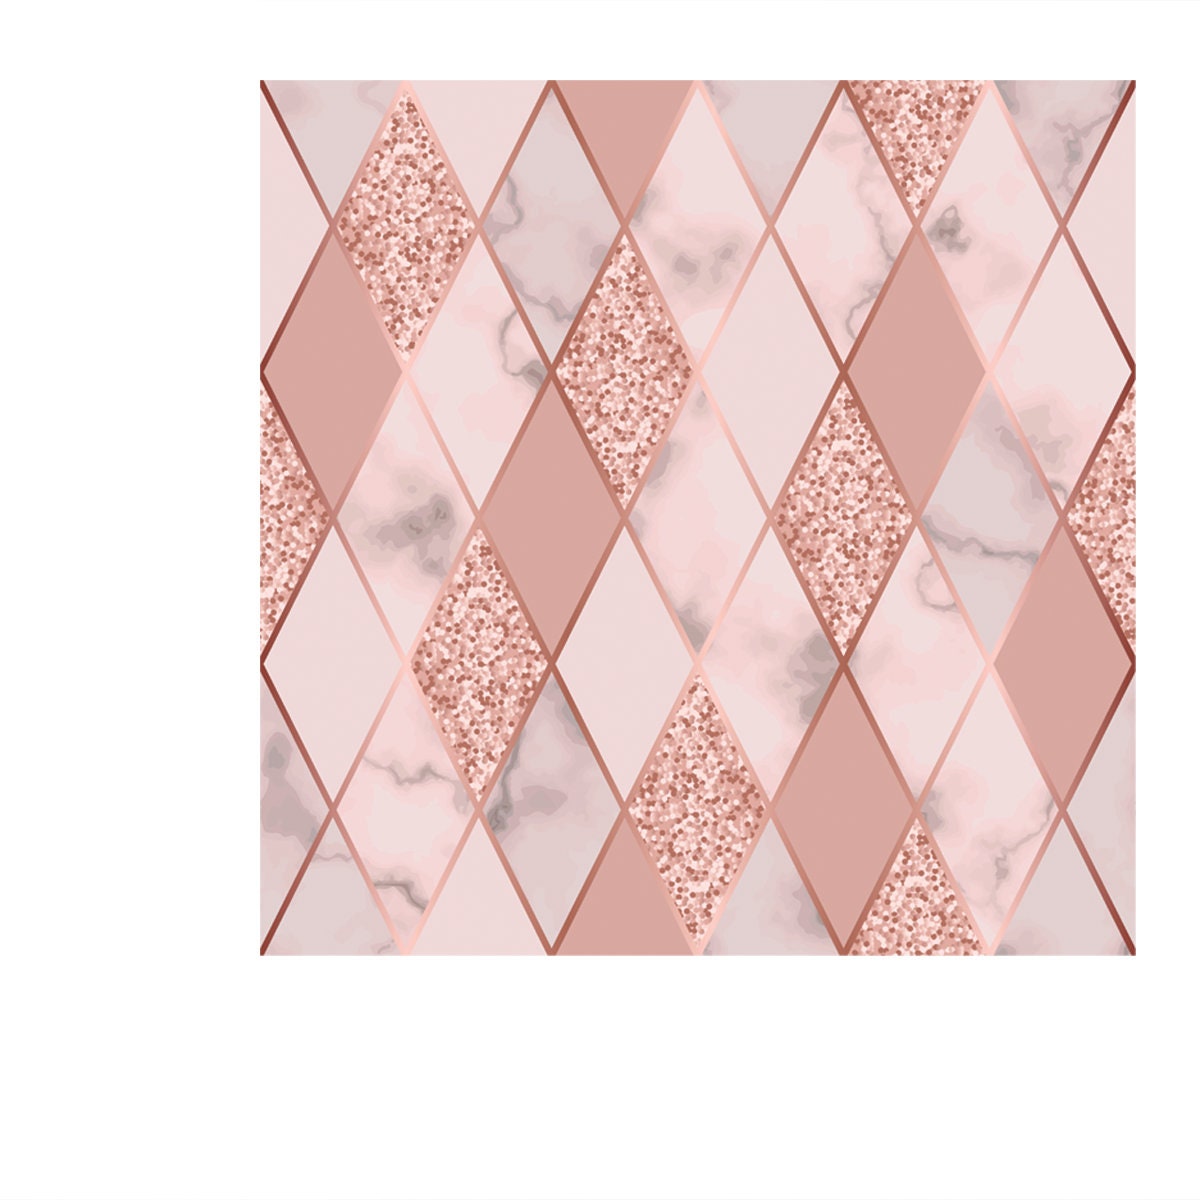 Pattern with Golden Geometric Diagonal Lines. Gold Glitter, White and Pink Rhombus Marbling Wallpaper Bedroom Mural